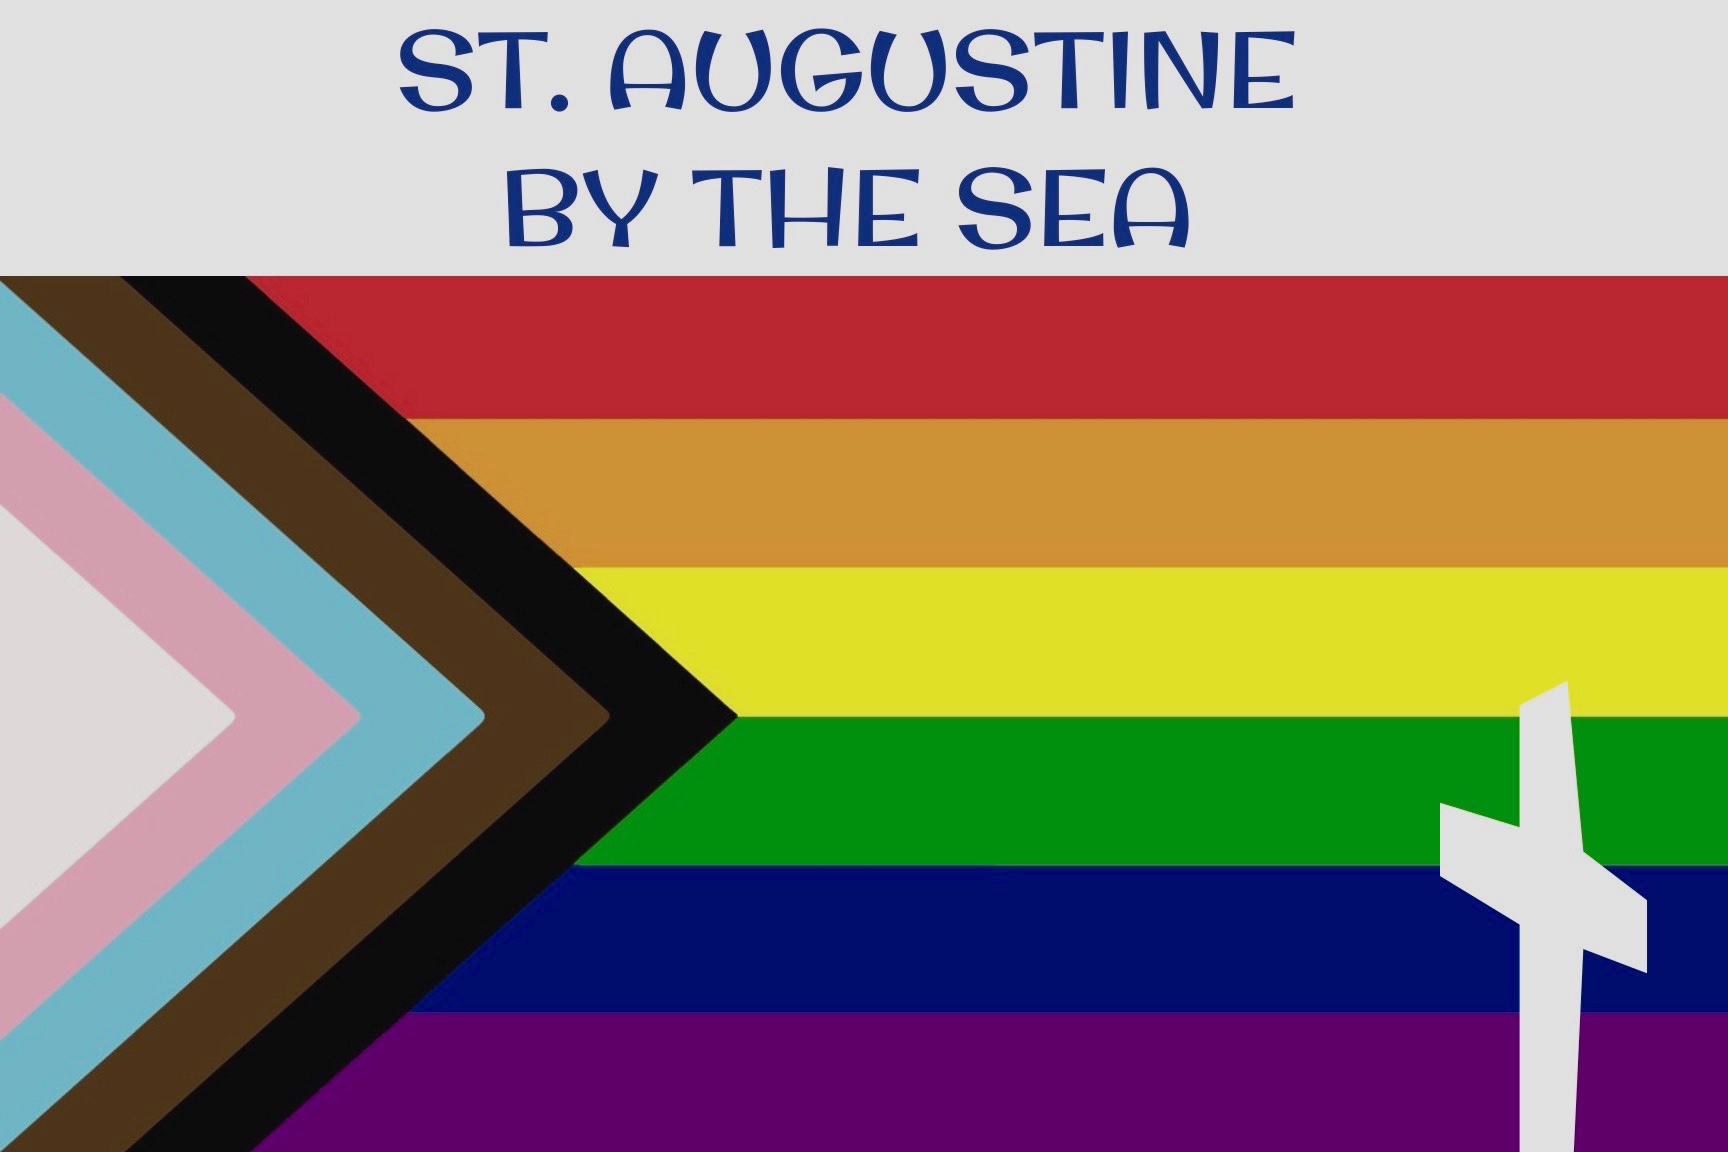 Join us for PRIDE on the Promenade, Sat. June 3, 11a4p St. Augustine